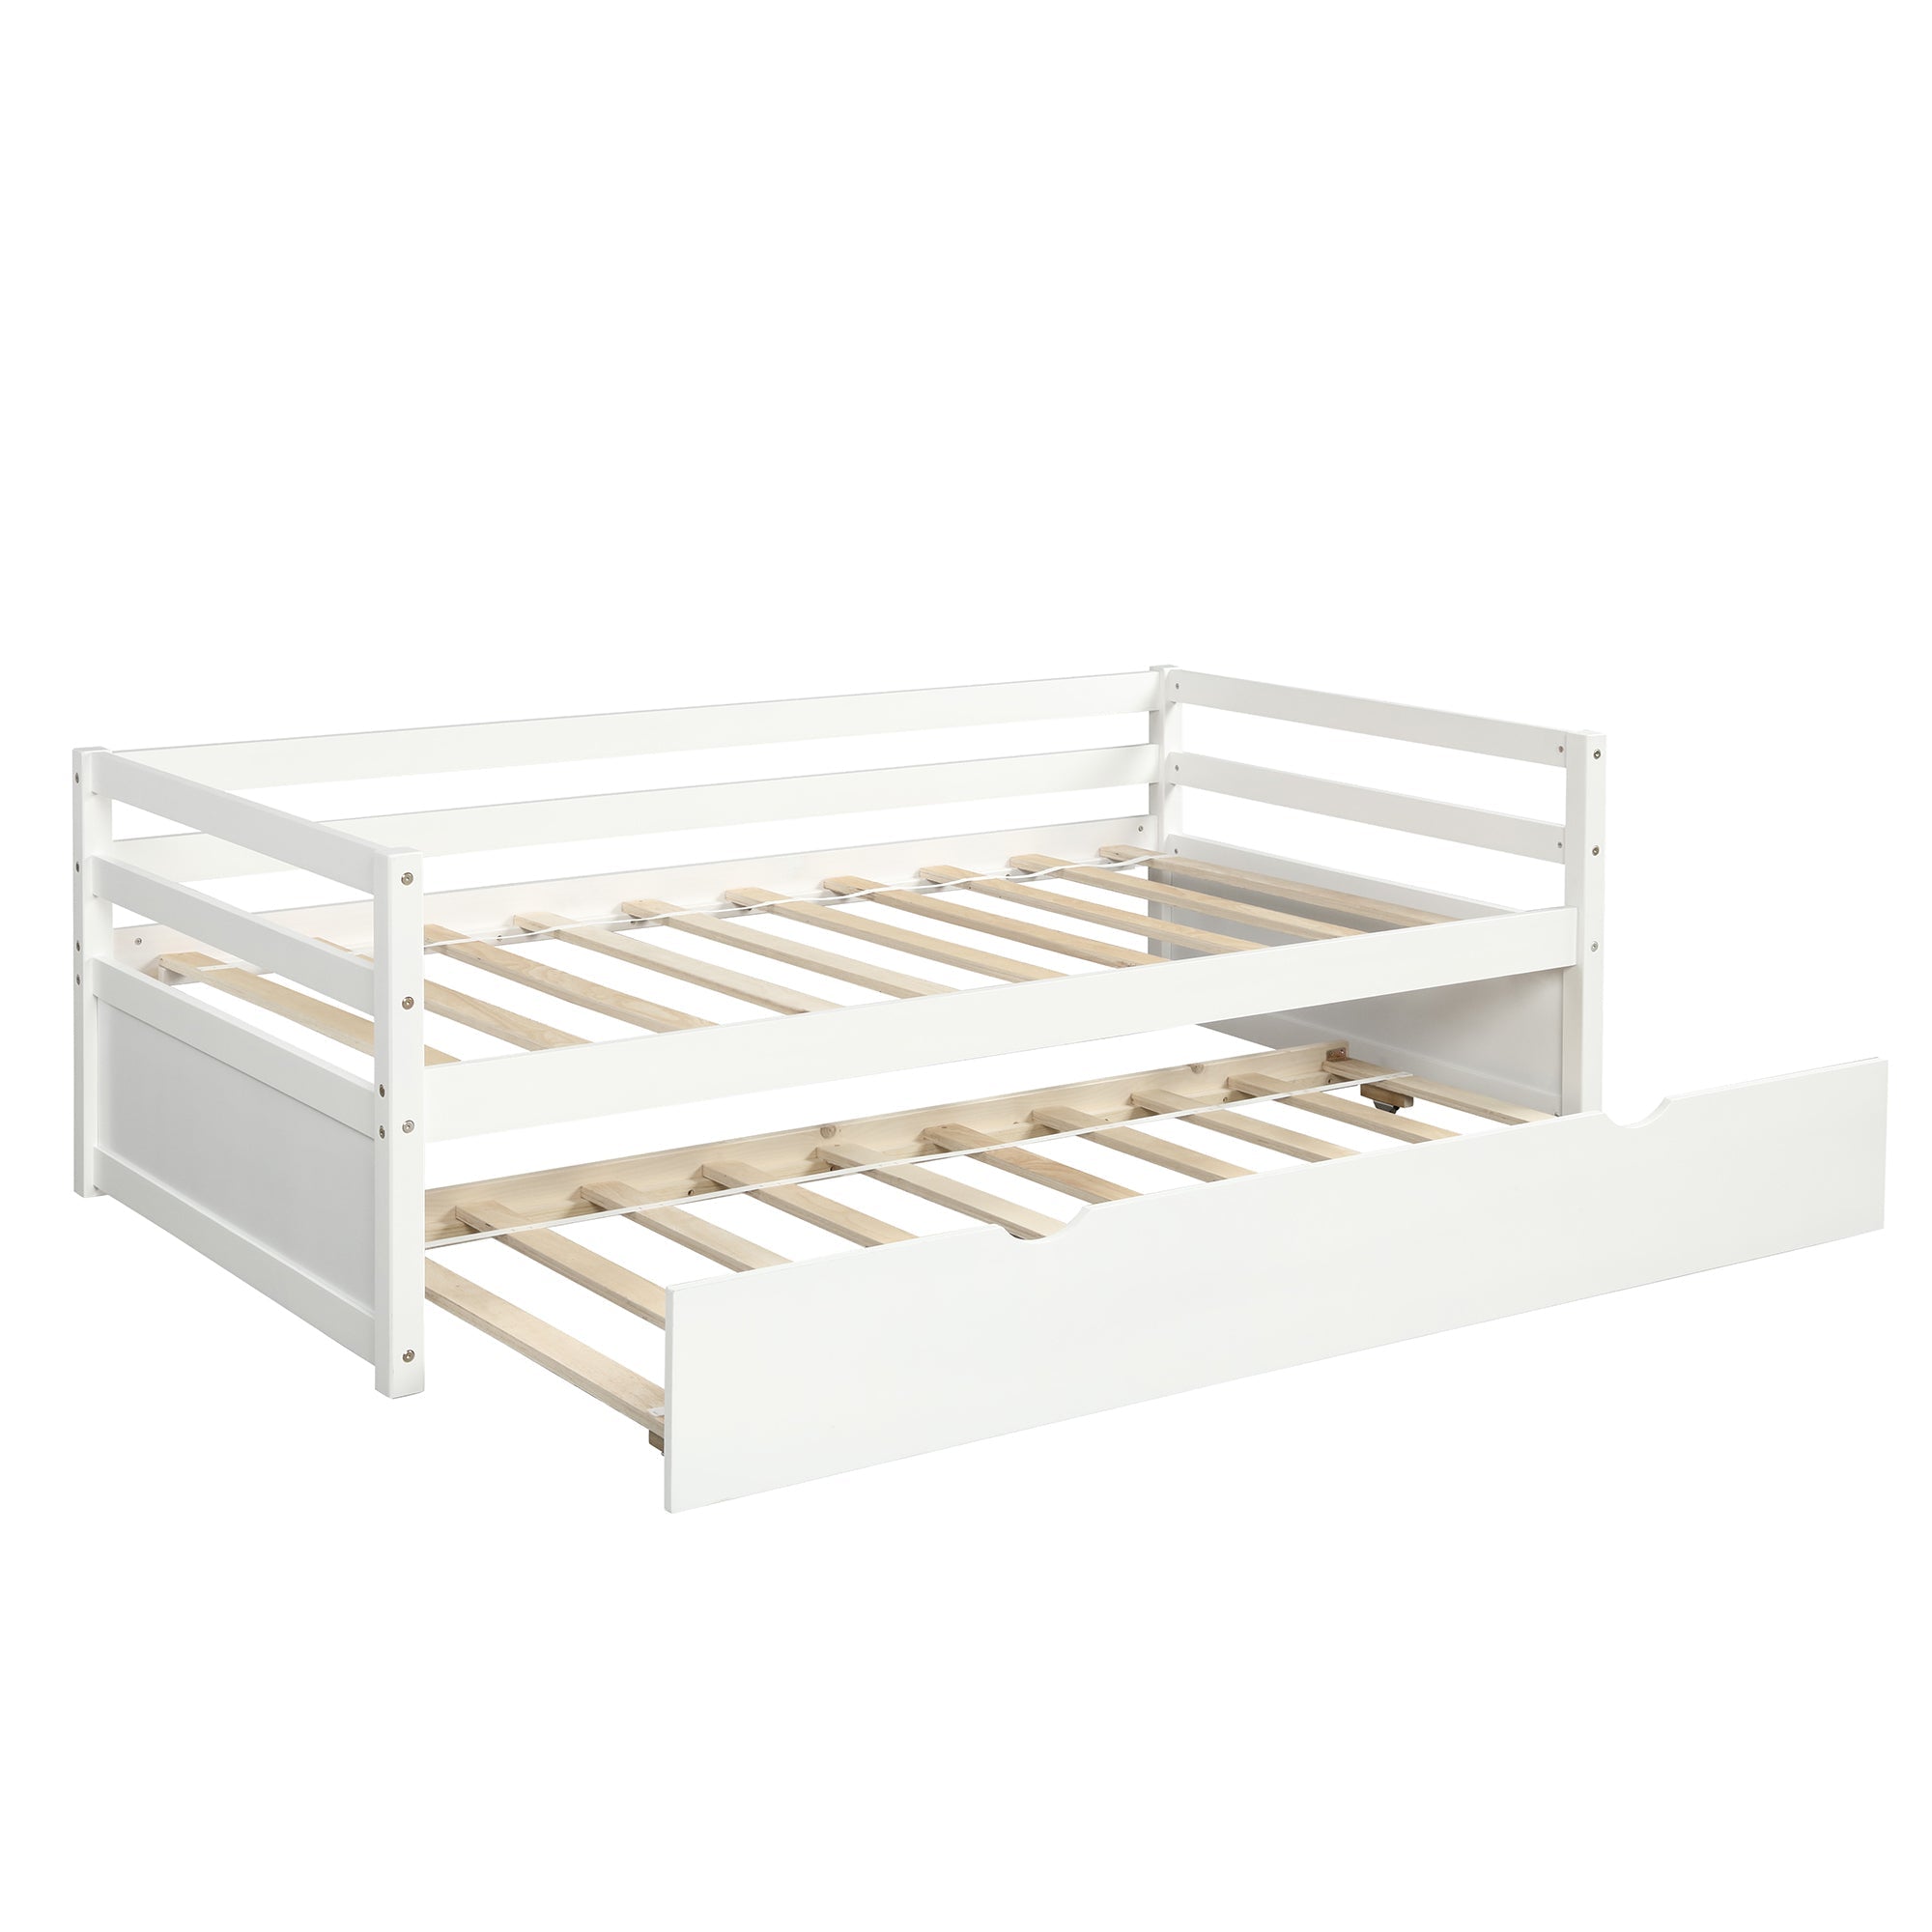 Daybed with Trundle Frame Set | Twin Size | White | Space-Saving Solution